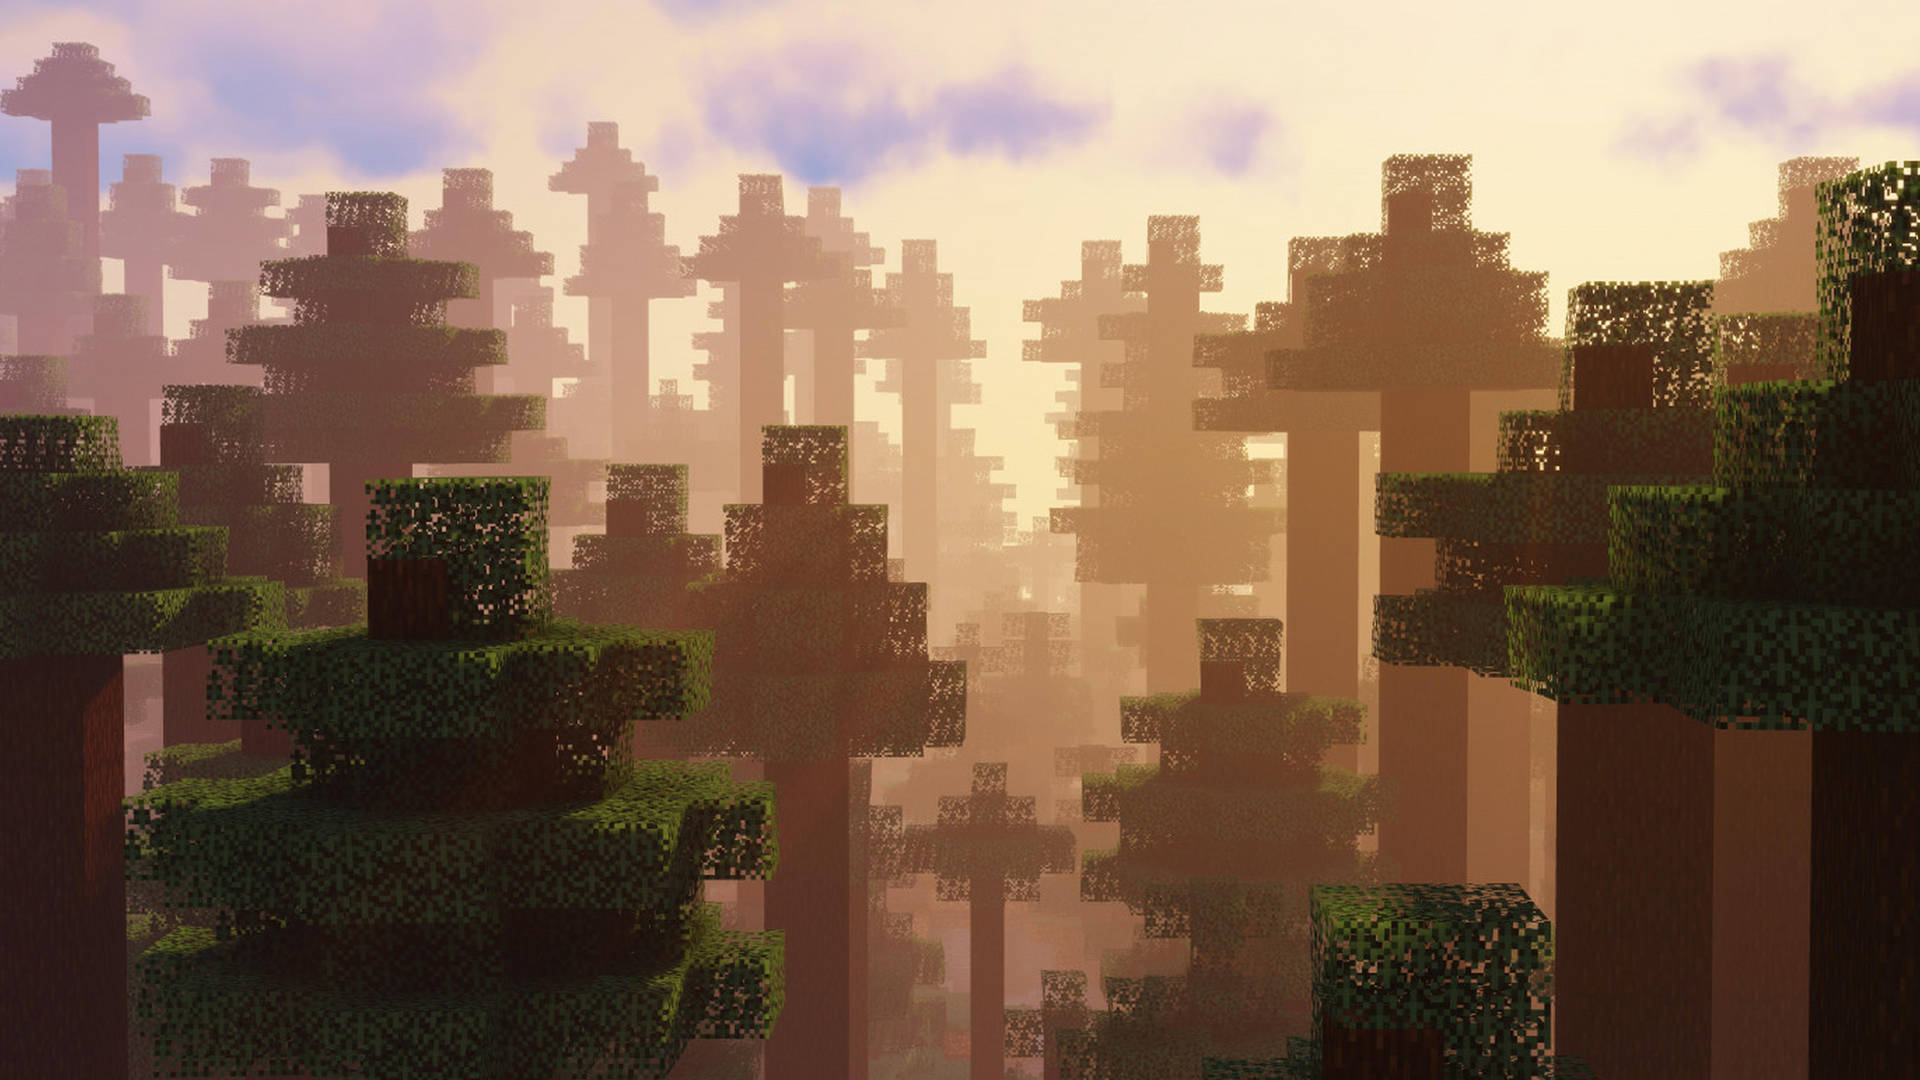 Forest Of Giant Trees 2560x1440 Minecraft Picture